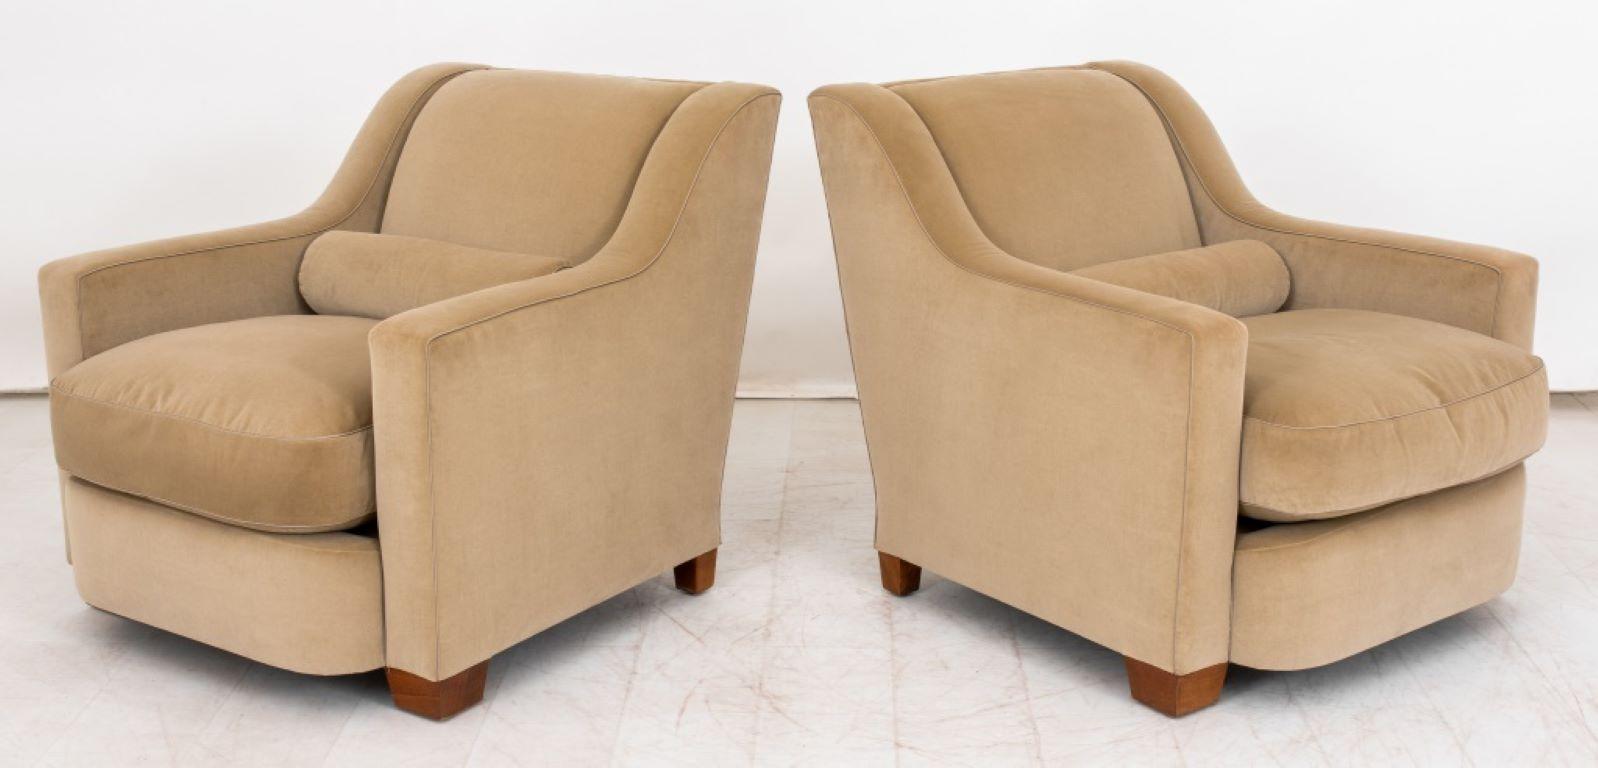 Pair of Art Deco Revival Thad Hayes Beige Velvet Upholstered Armchairs, with silk trim piping.

Dealer: S138XX